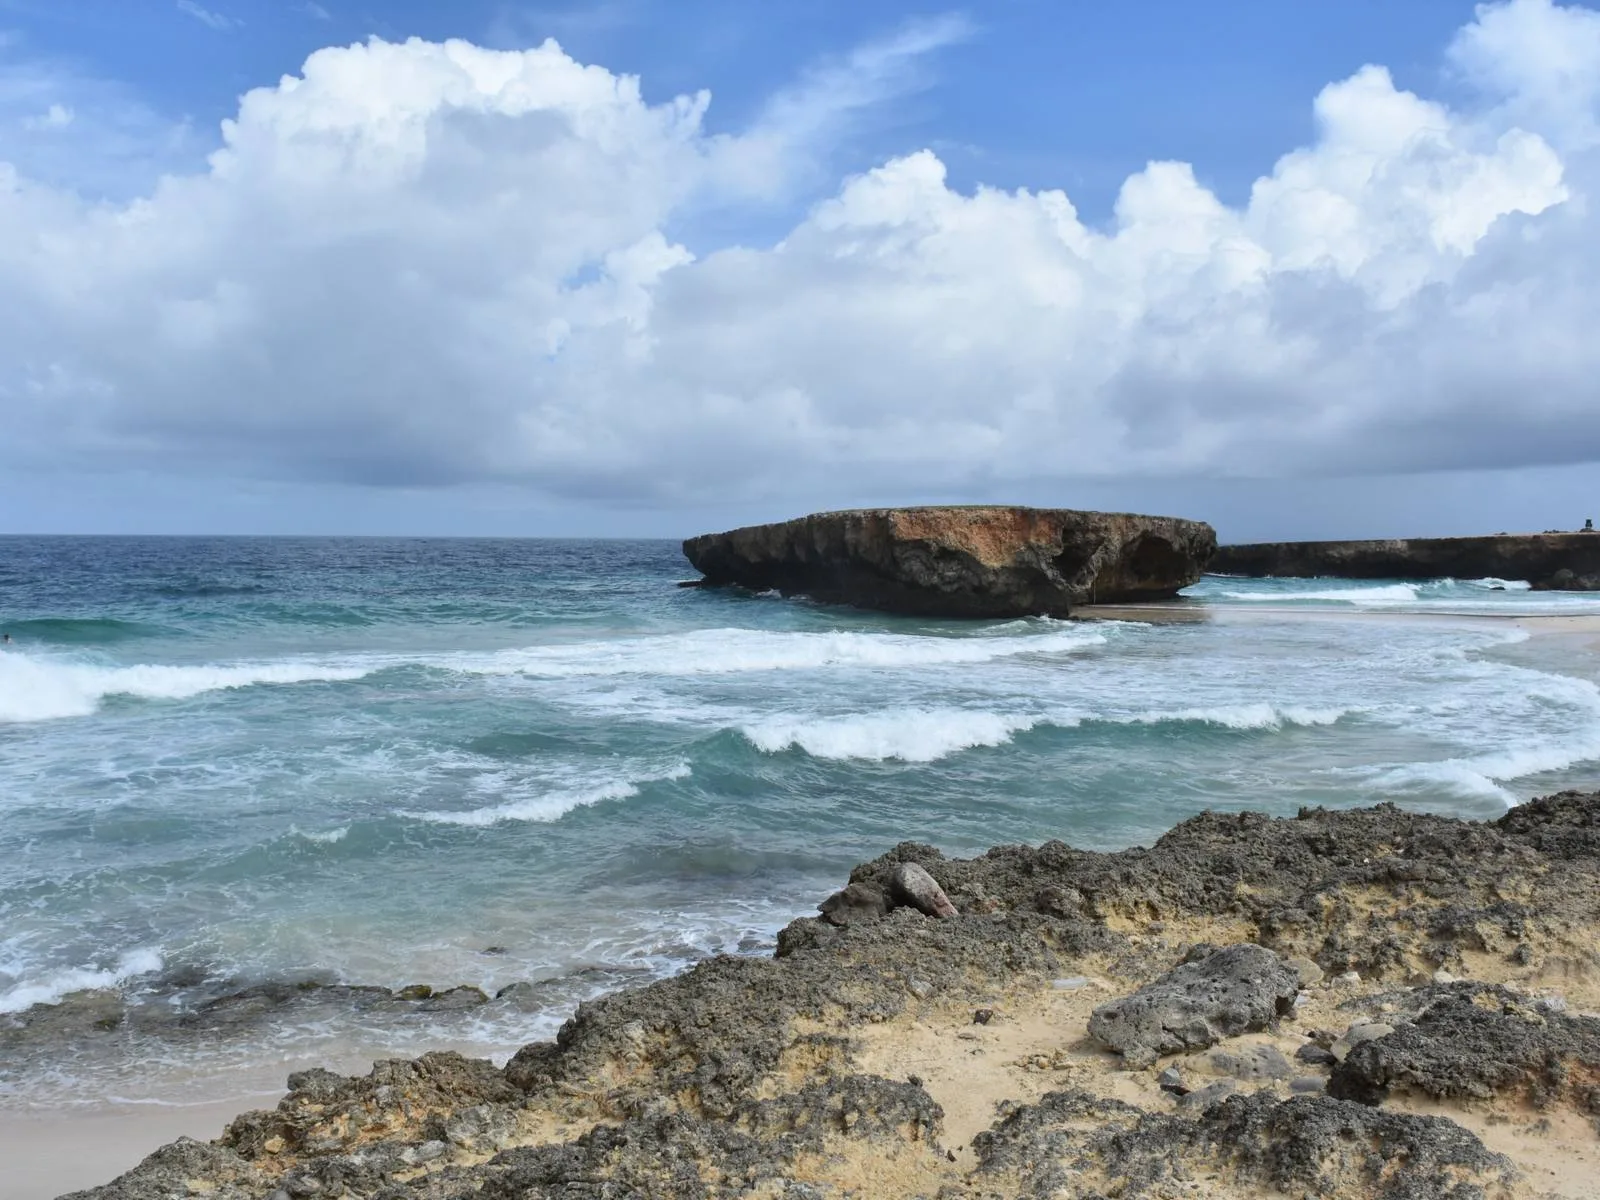 A large Moro Rock formation and a rocky coast smashed by strong waves offshore of Boca Keto, one of the best beaches in Aruba